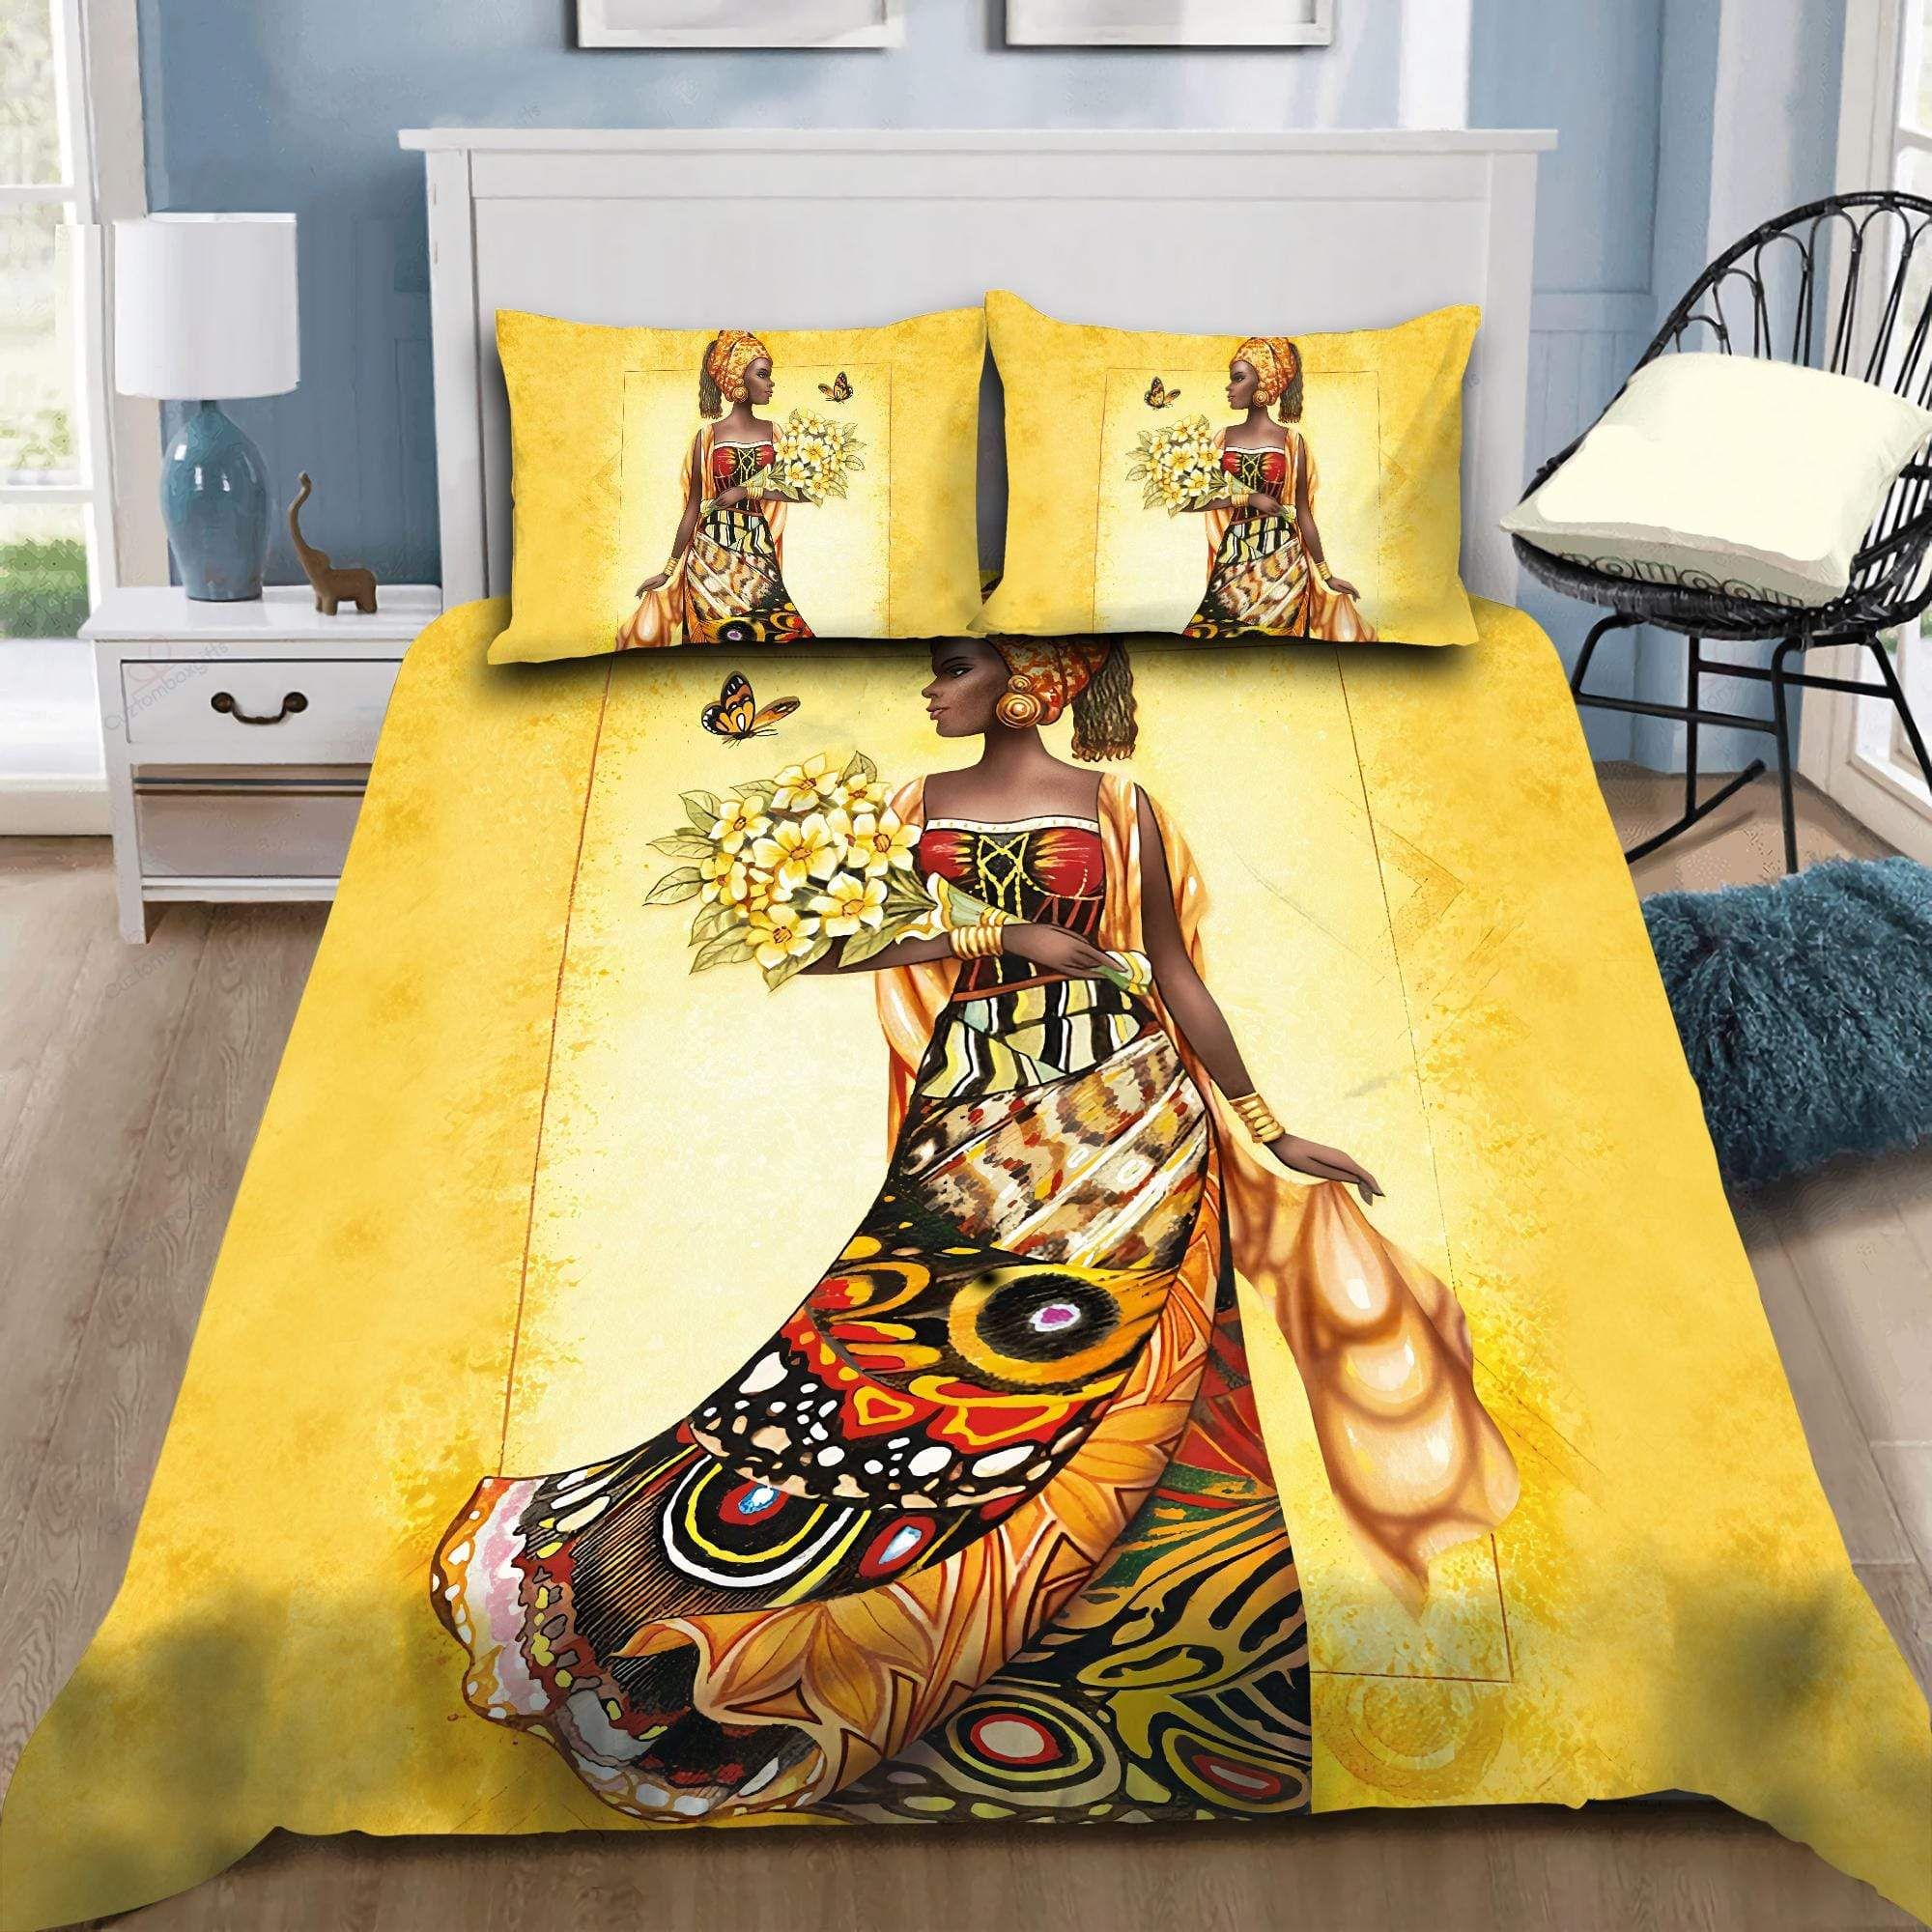 Beautiful African Girl And Flower Bedding Duvet Cover Bedding Set